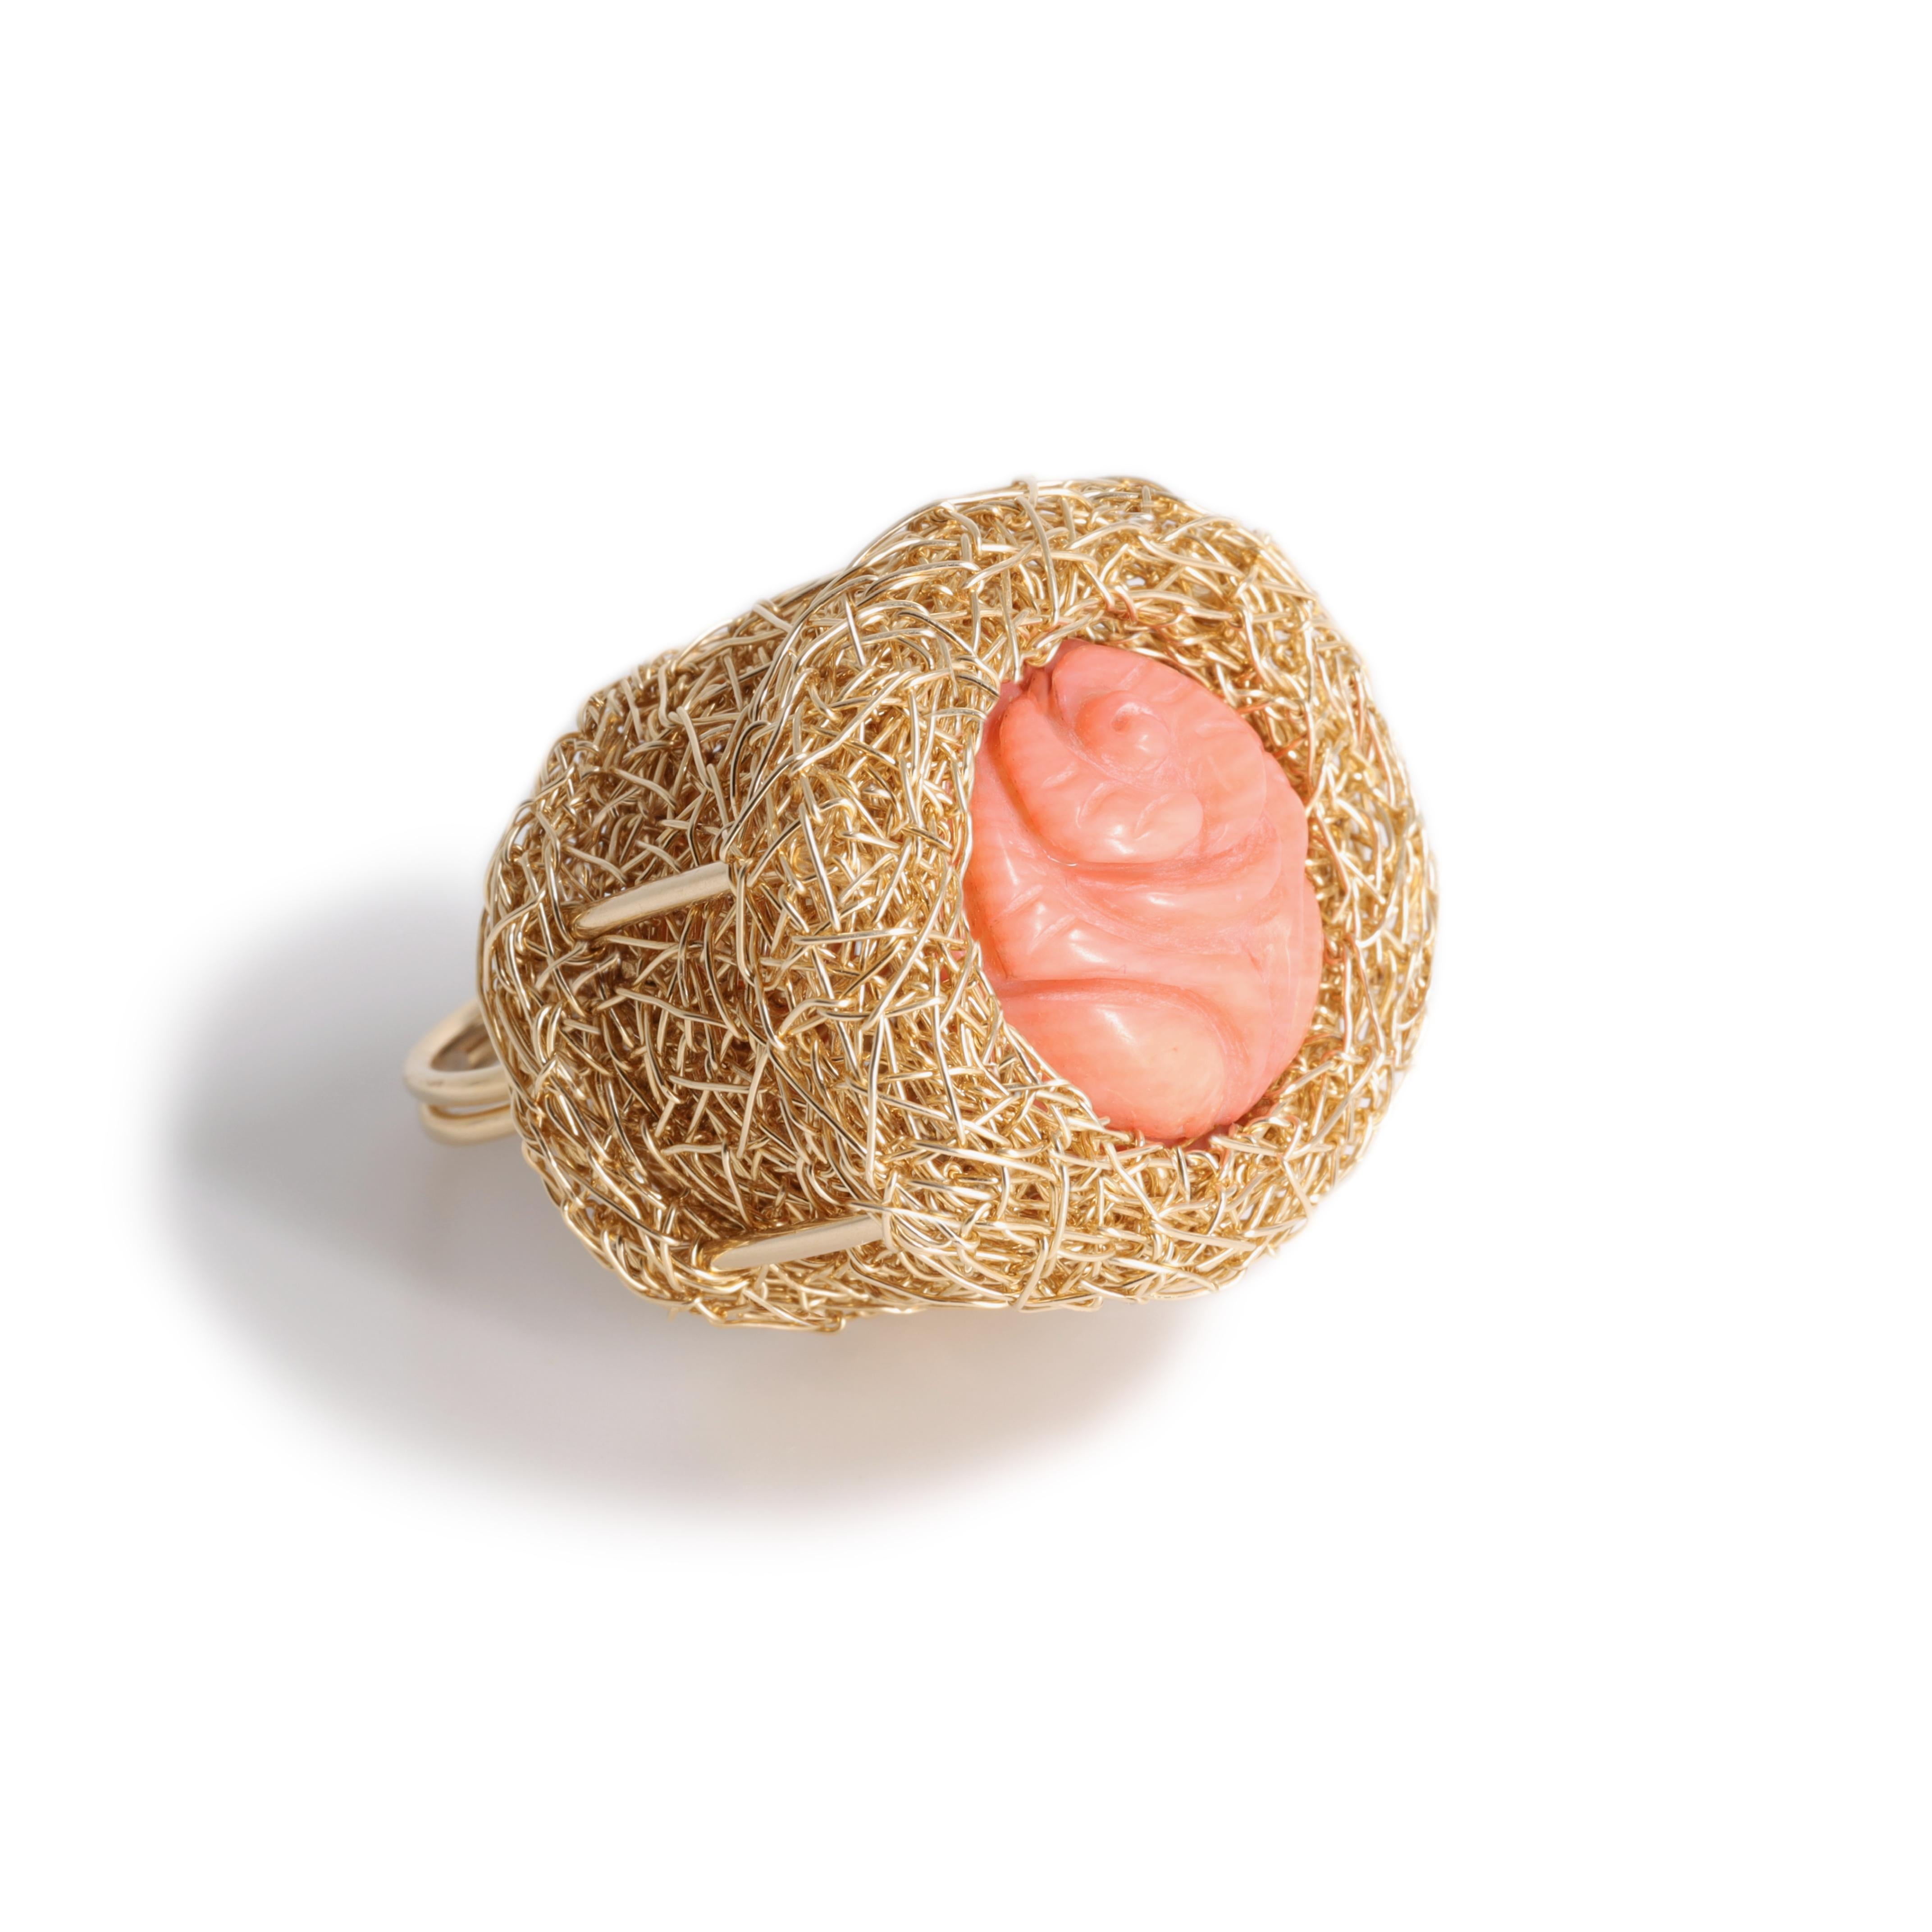 Women's or Men's Artist Statement Coral Basked Jewel in 14k Gold Filled Woven Cocktail Ring